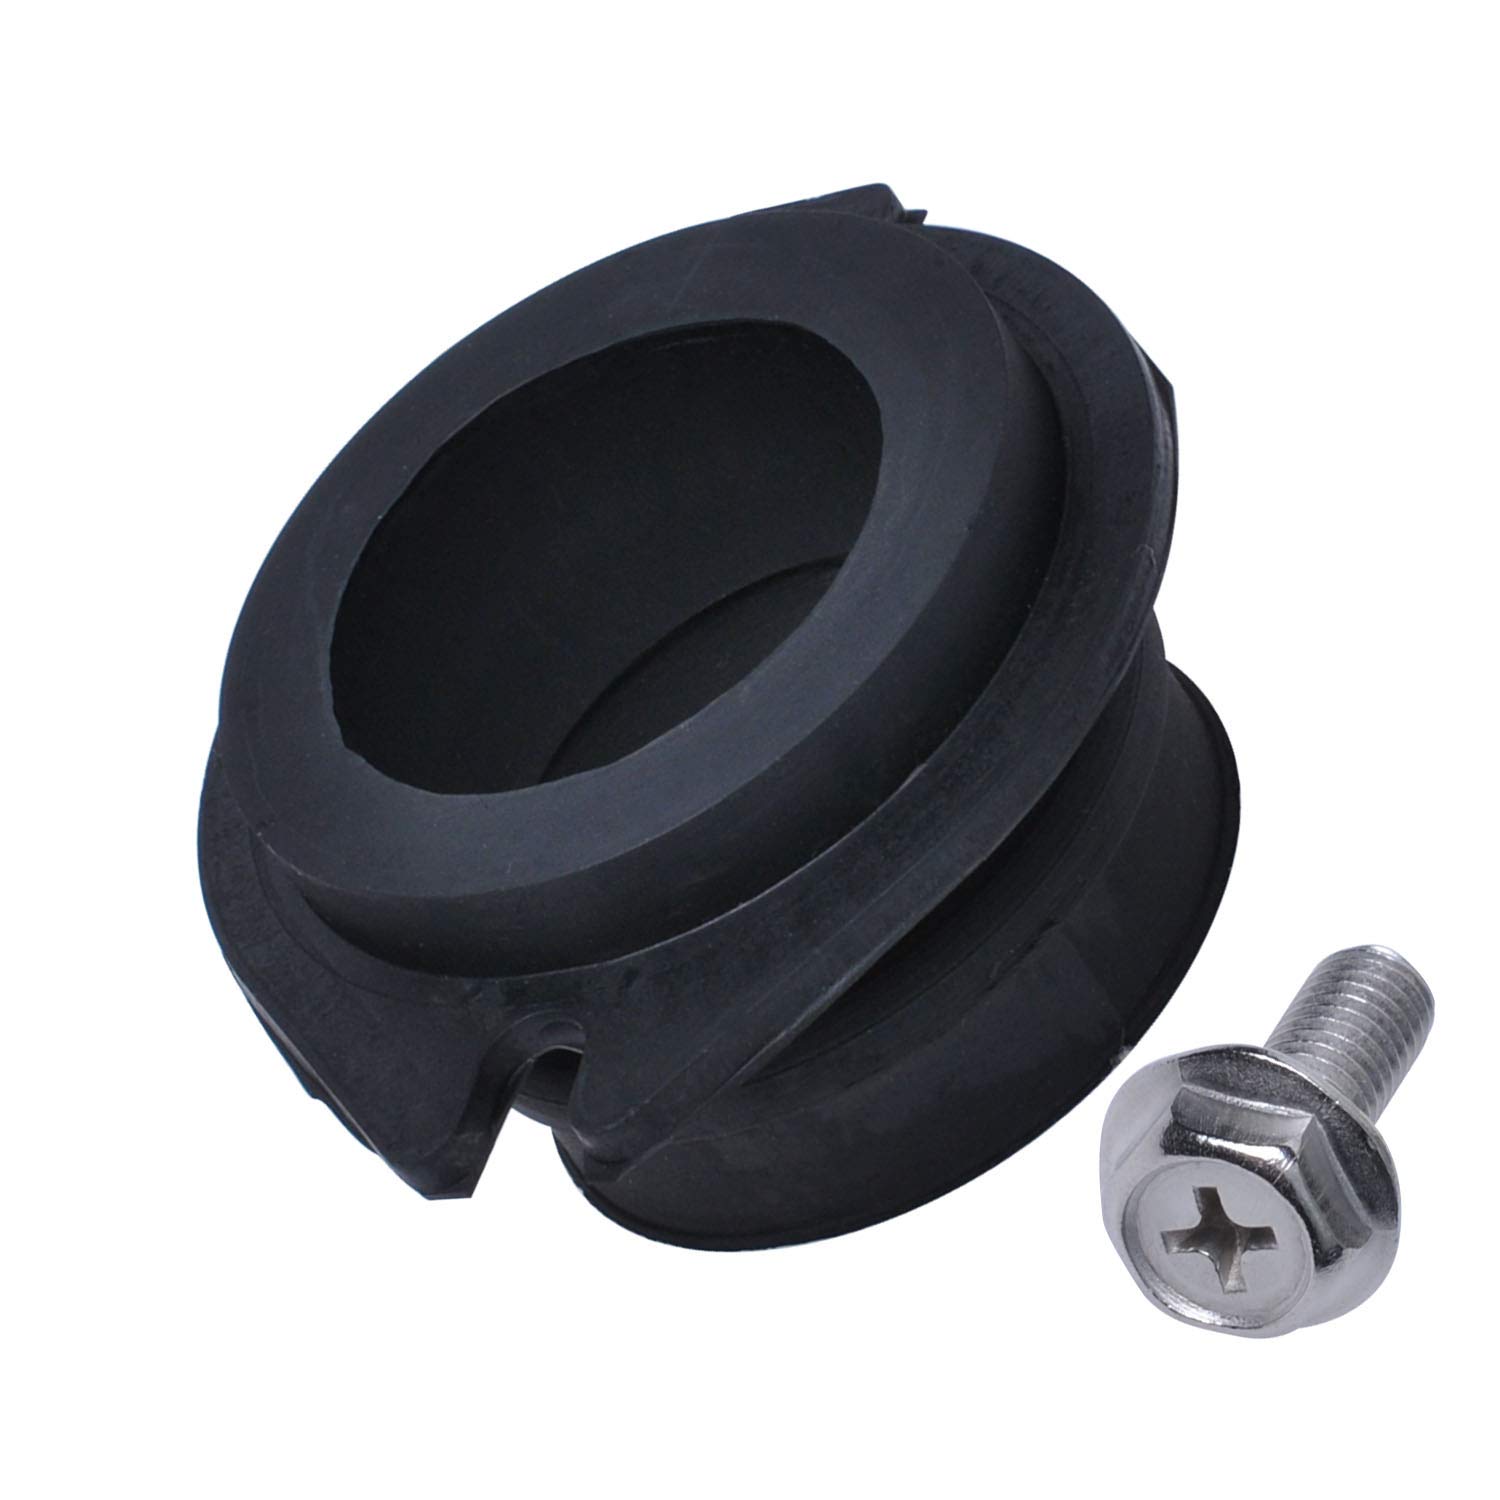 Flex Coupler 75499 Garbage Disposal Replacement Parts For Insink-erator Anti-Vibration Tailpipe Mount Coupling Replaces Previous Part Number 74085